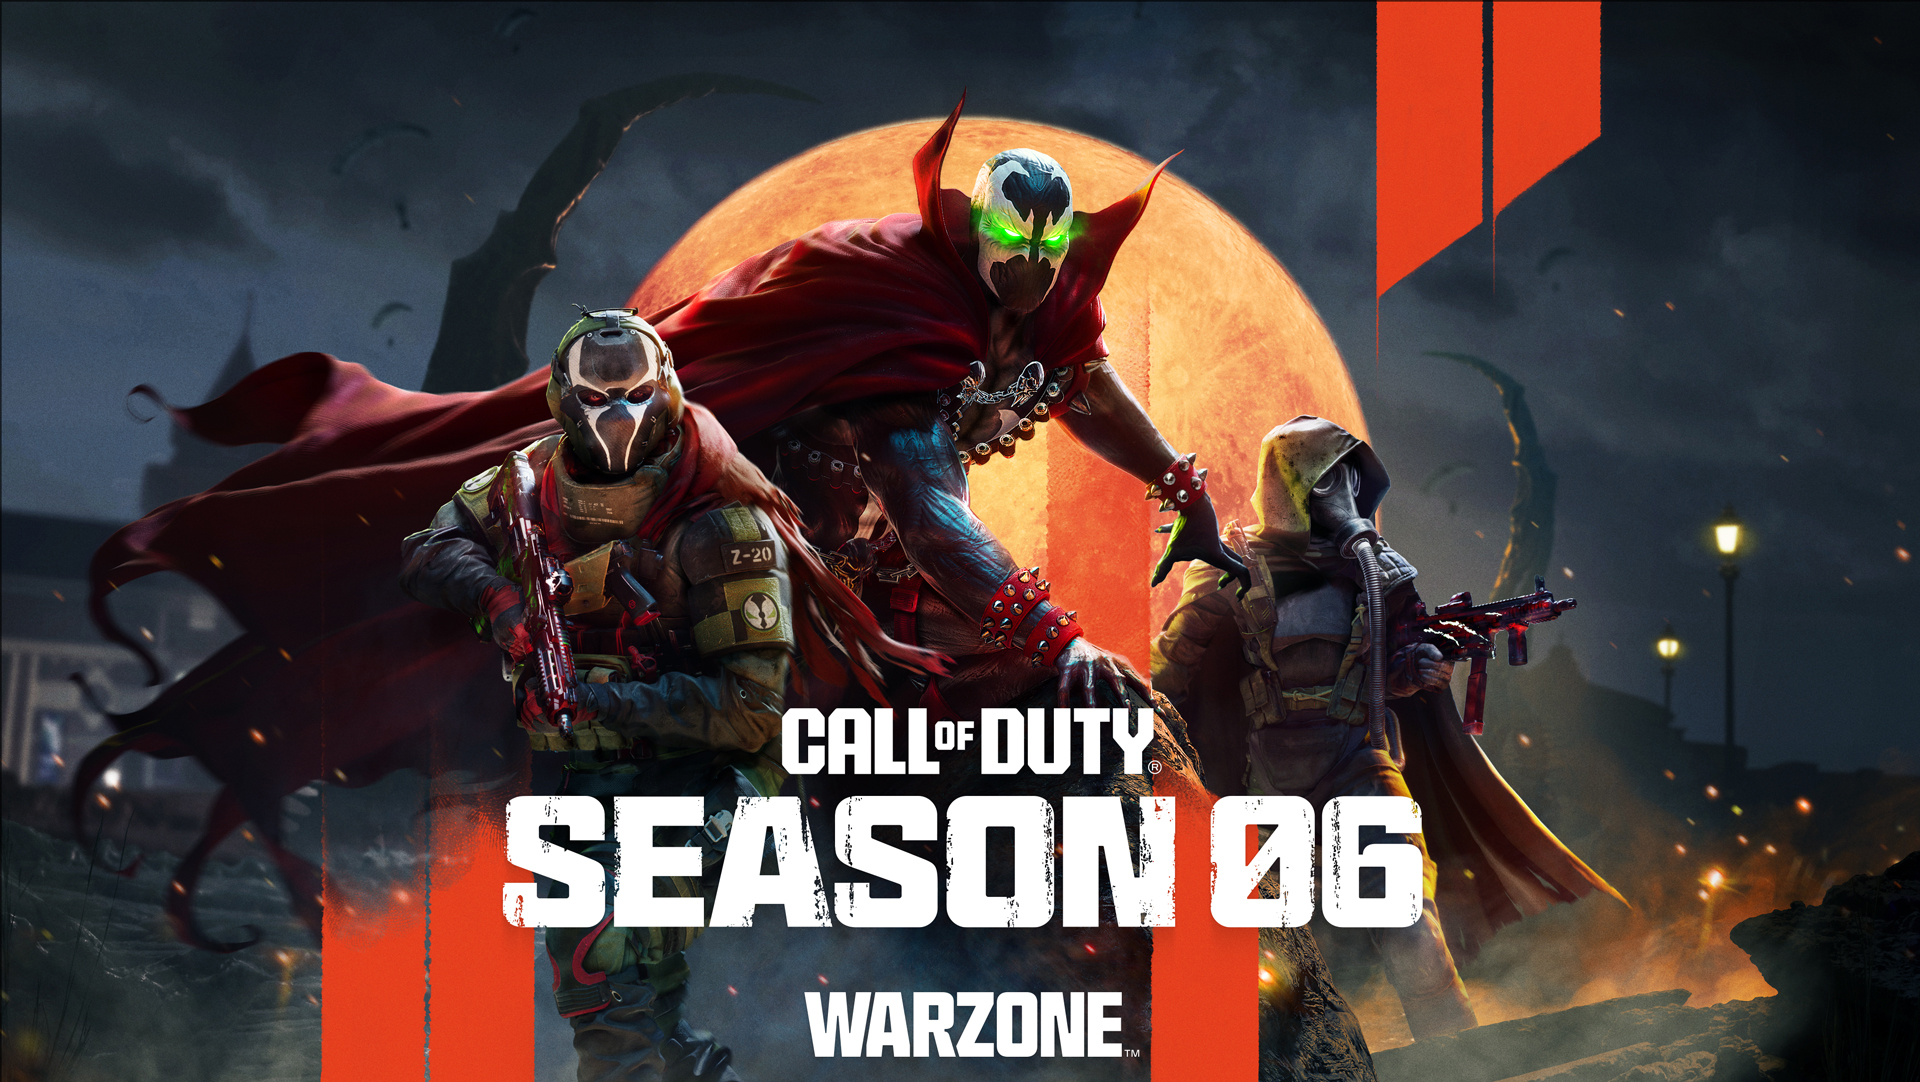 Call of Duty Season 6's Spawn anti-hero character stands in front of a full moon, with glowing green eyes and a red cape